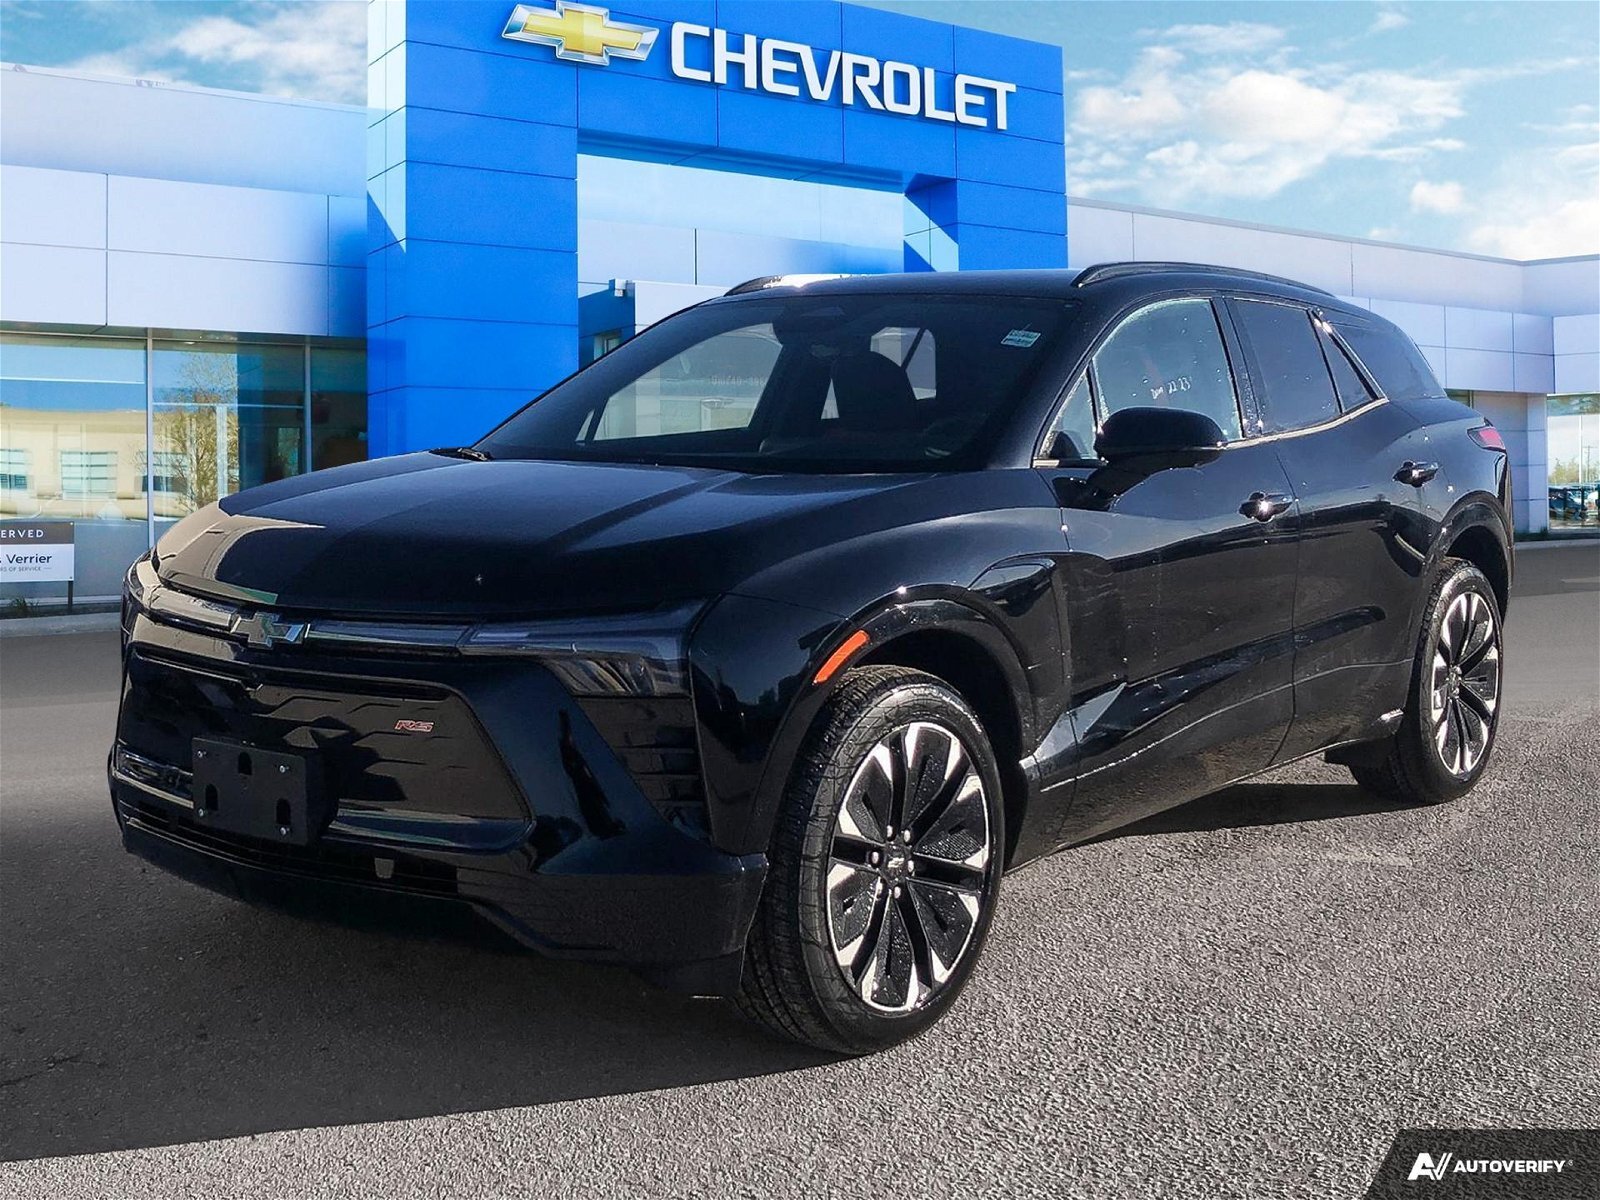 2024 Chevrolet Blazer EV eAWD RS $9000 in Government Incentives!